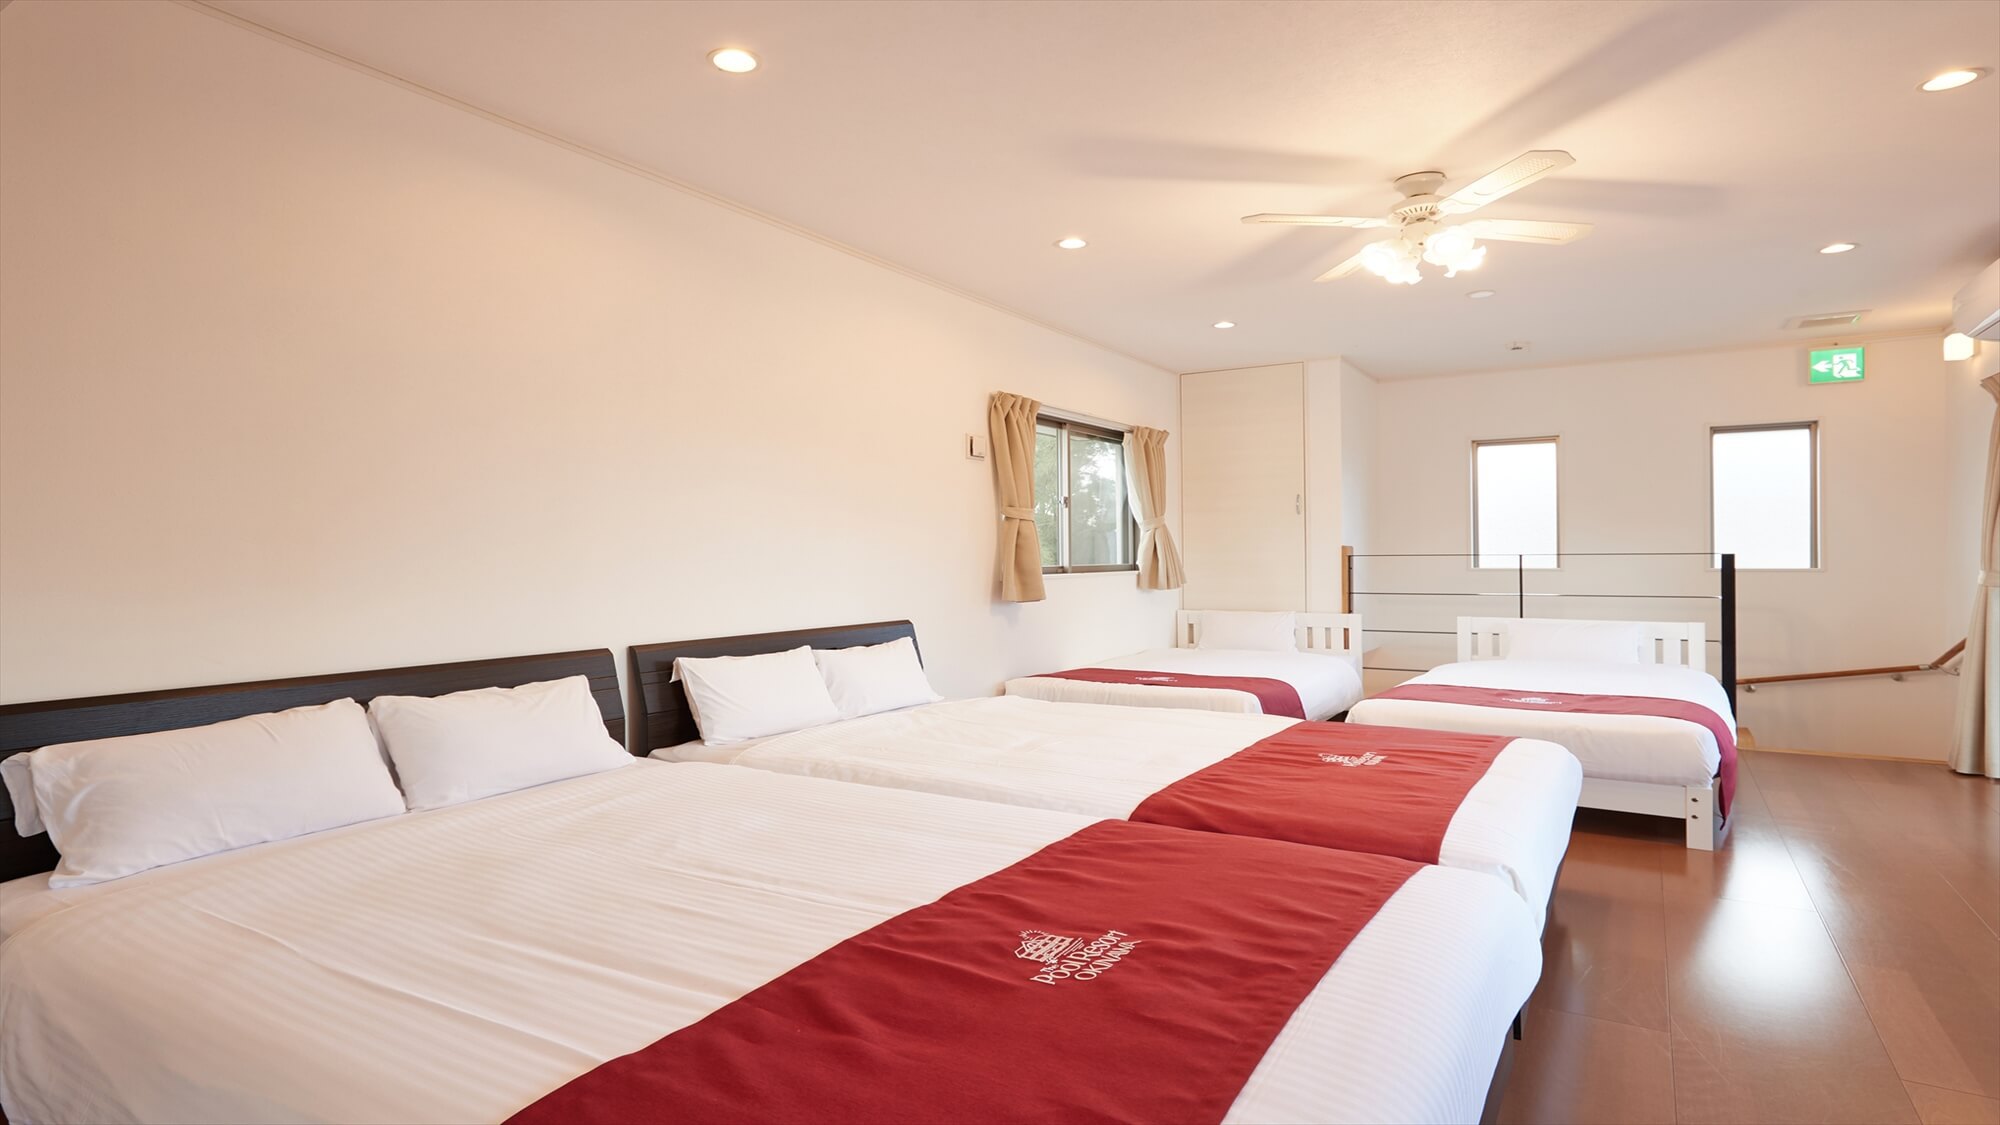 The Pool Resort villa Hasta Manana Pension Hasta Manana is a popular choice amongst travelers in Okinawa, whether exploring or just passing through. Featuring a satisfying list of amenities, guests will find their stay at the property 